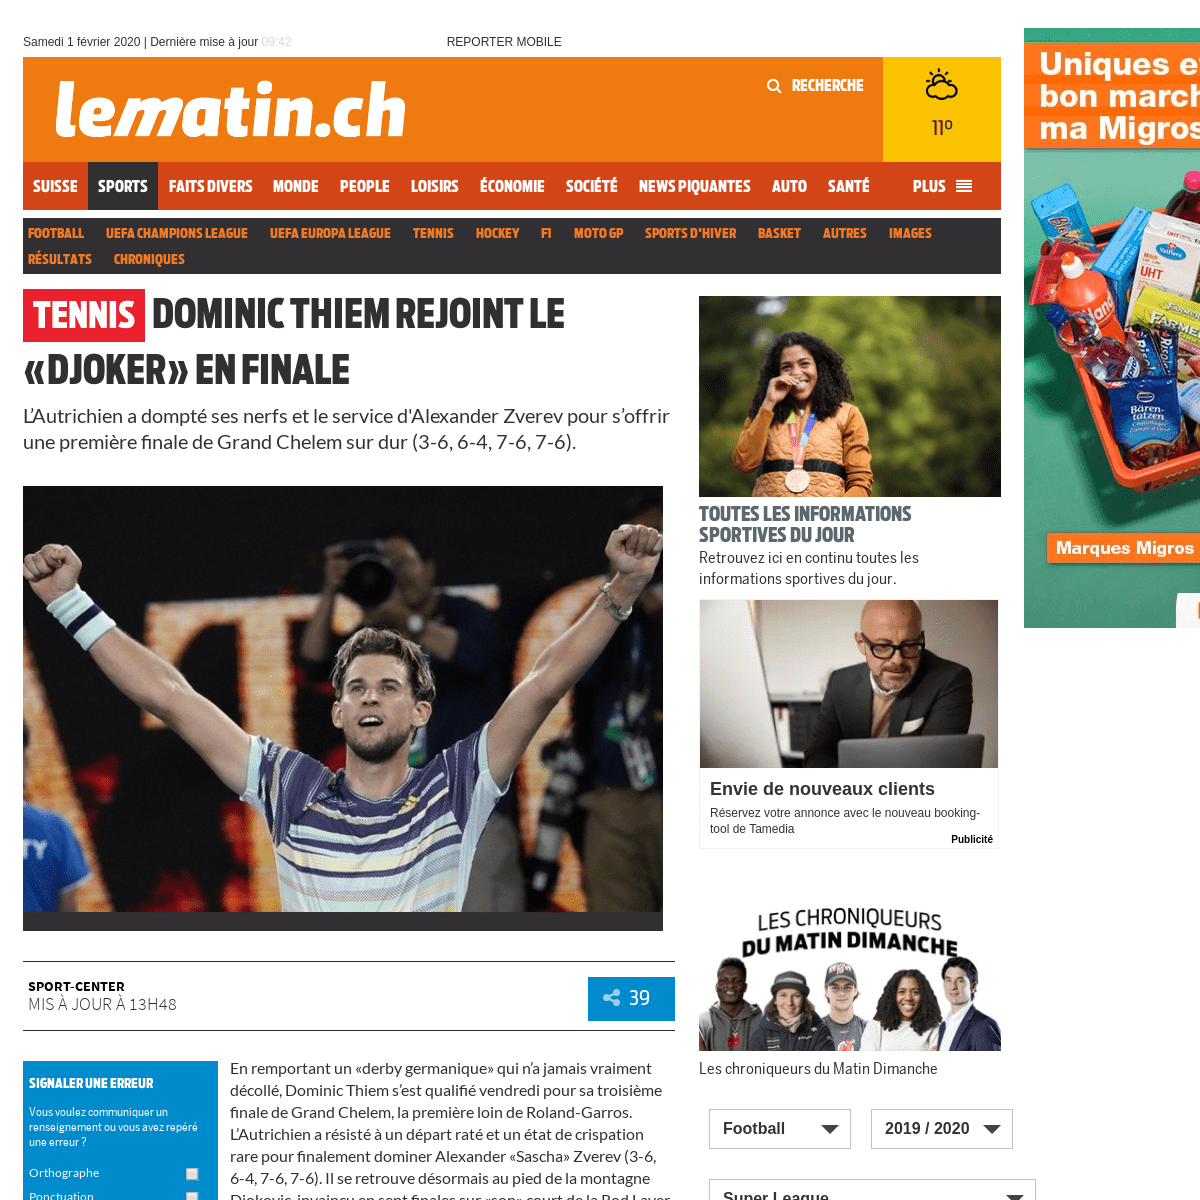 A complete backup of www.lematin.ch/sports/tennis/dominic-thiem-rejoint-djoker-finale/story/17099437